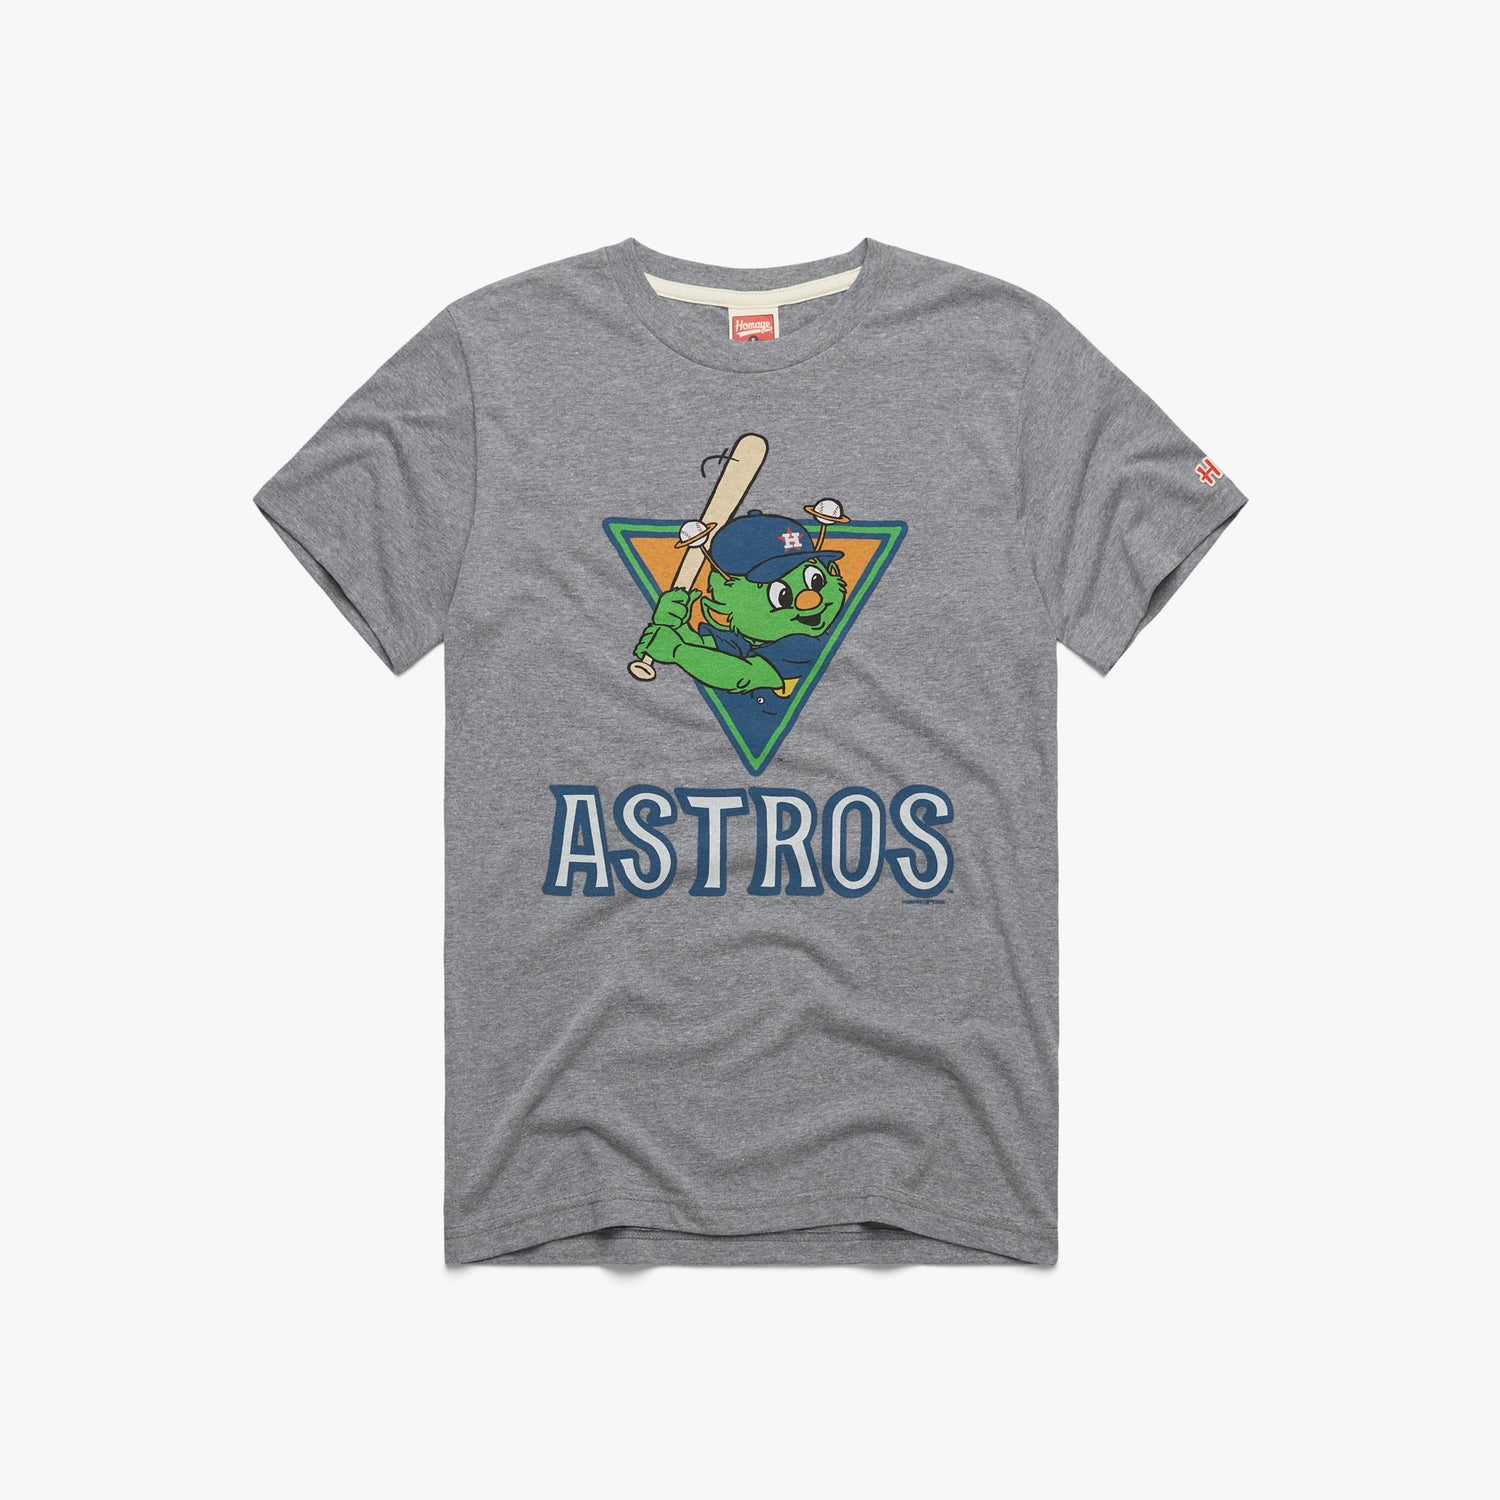 New shirt came in today! Had to support Orbit. : r/Astros